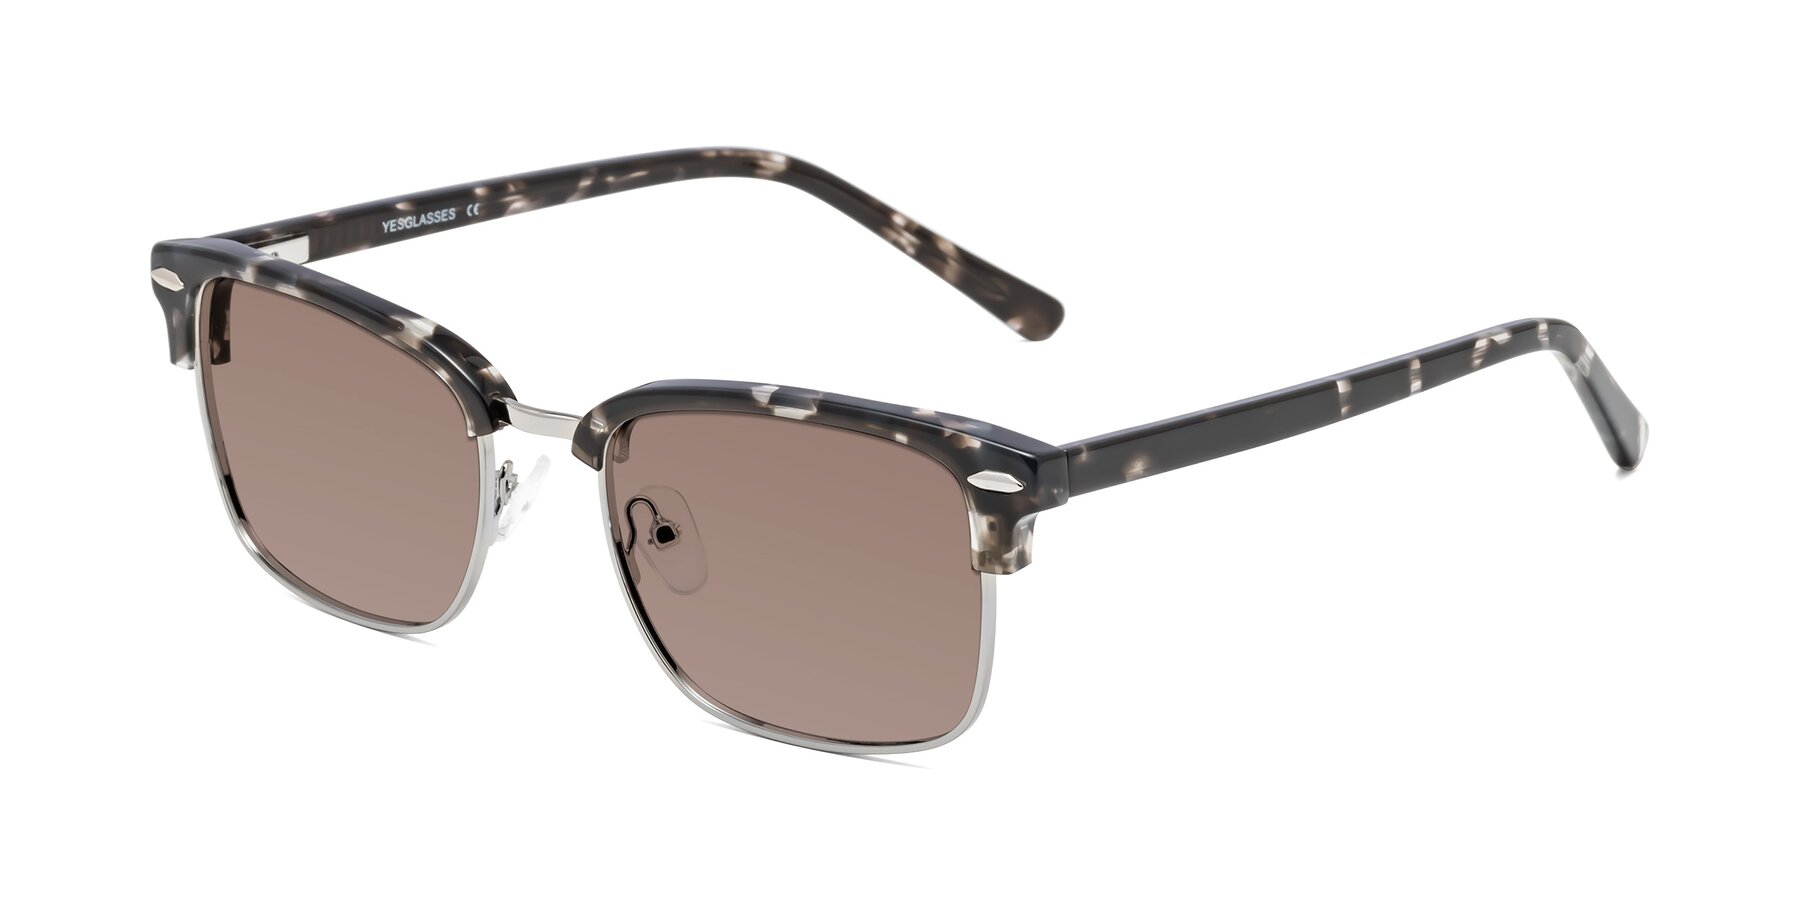 Angle of 17464 in Tortoise-Silver with Medium Brown Tinted Lenses